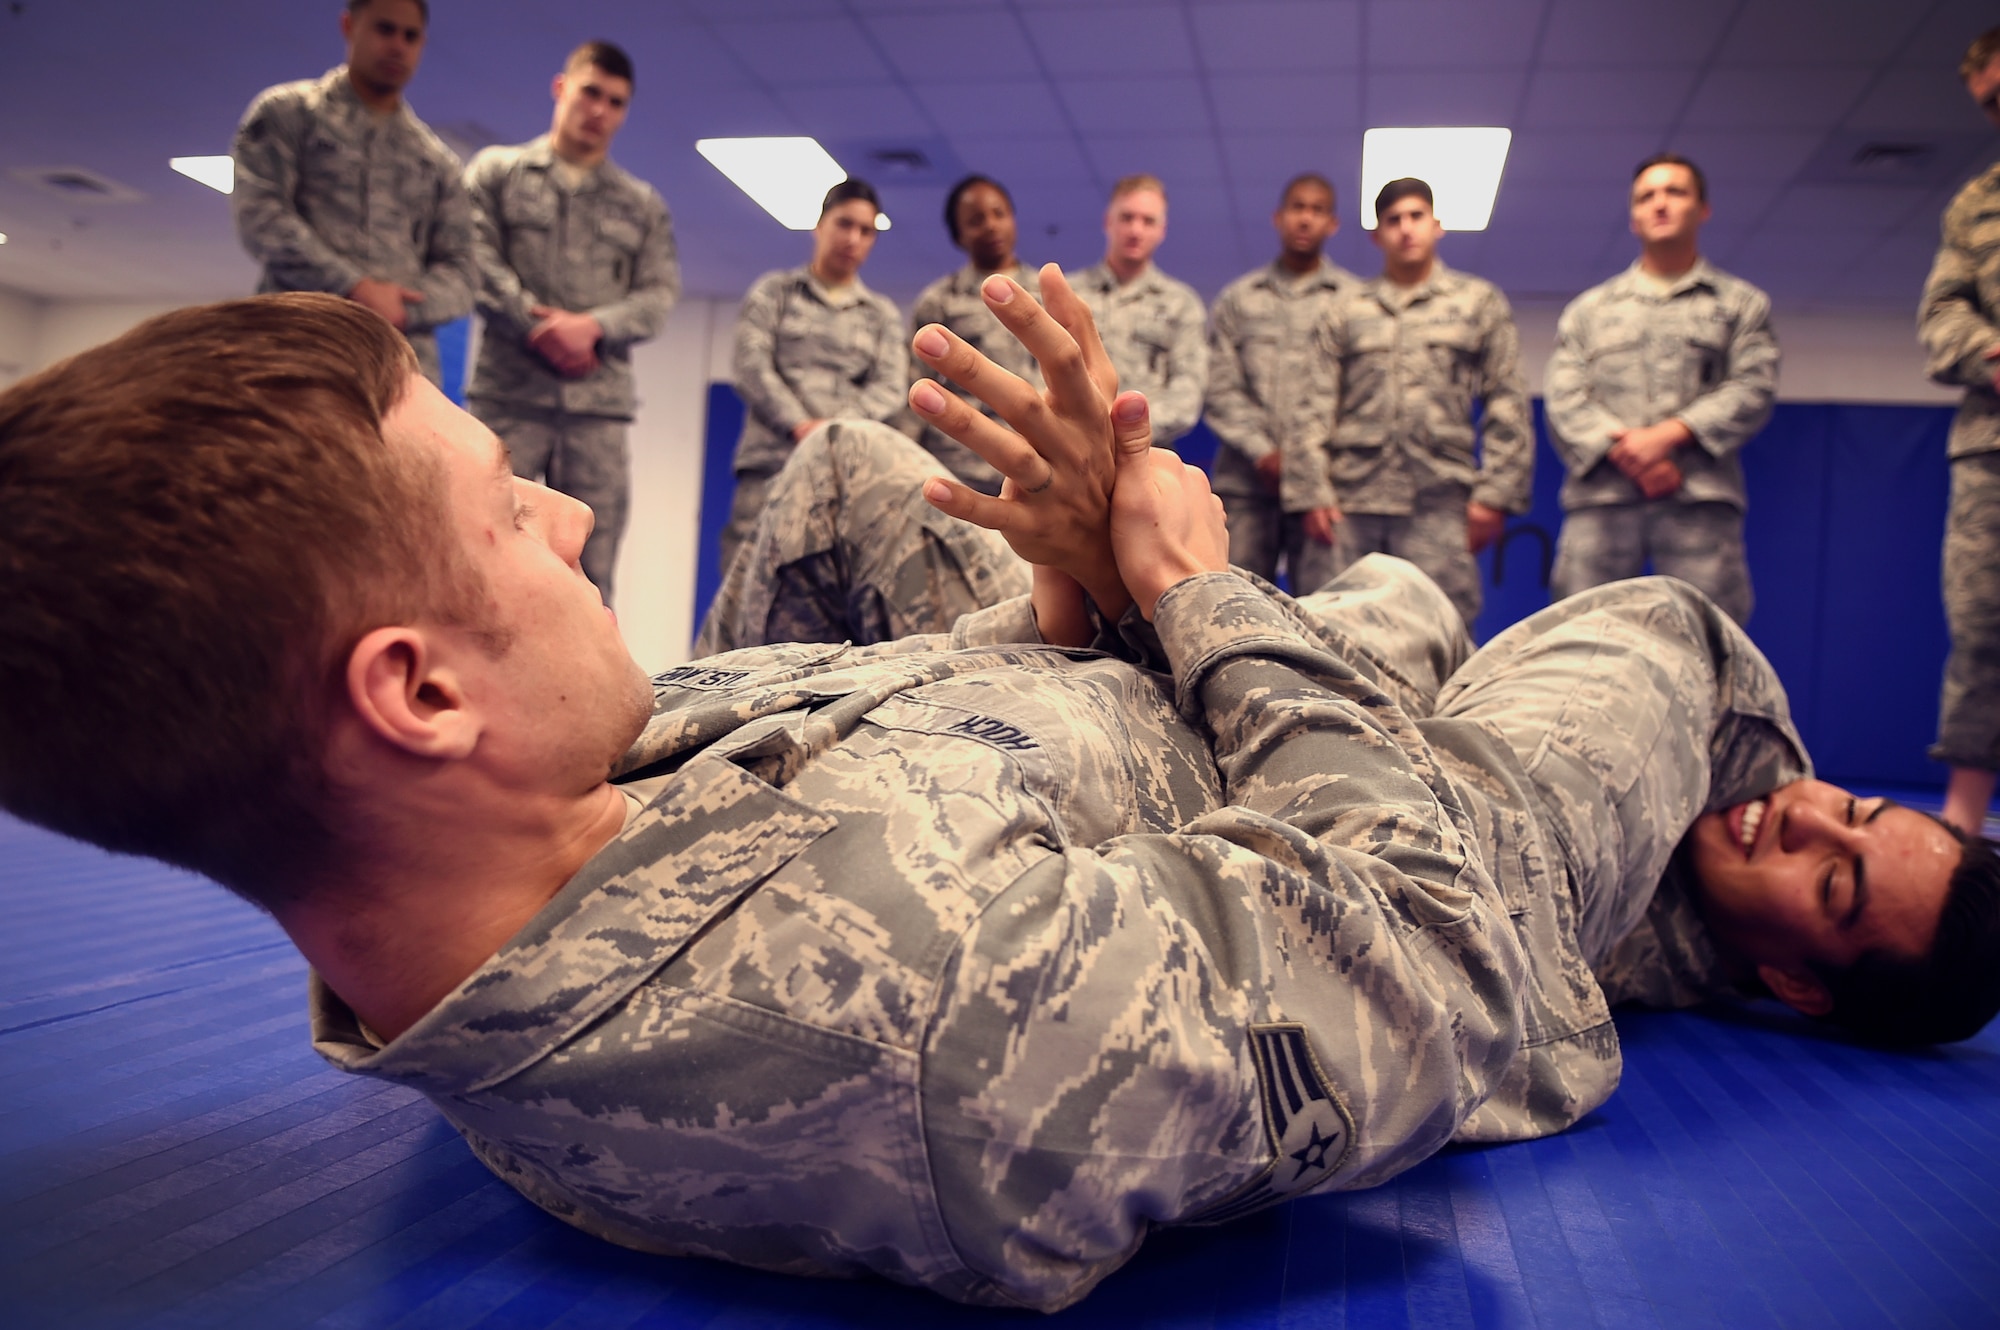 Senior Airman David Hoch, 11th Security Forces Squadron response force leader, applies an arm bar on a classmate during the Basic Combatives Course at Fort Belvoir, Jan. 8, 2016. Students learn more than 30 techniques during the week-long course (U.S. Air Force photo by Senior Airman Mariah Haddenham/Released)